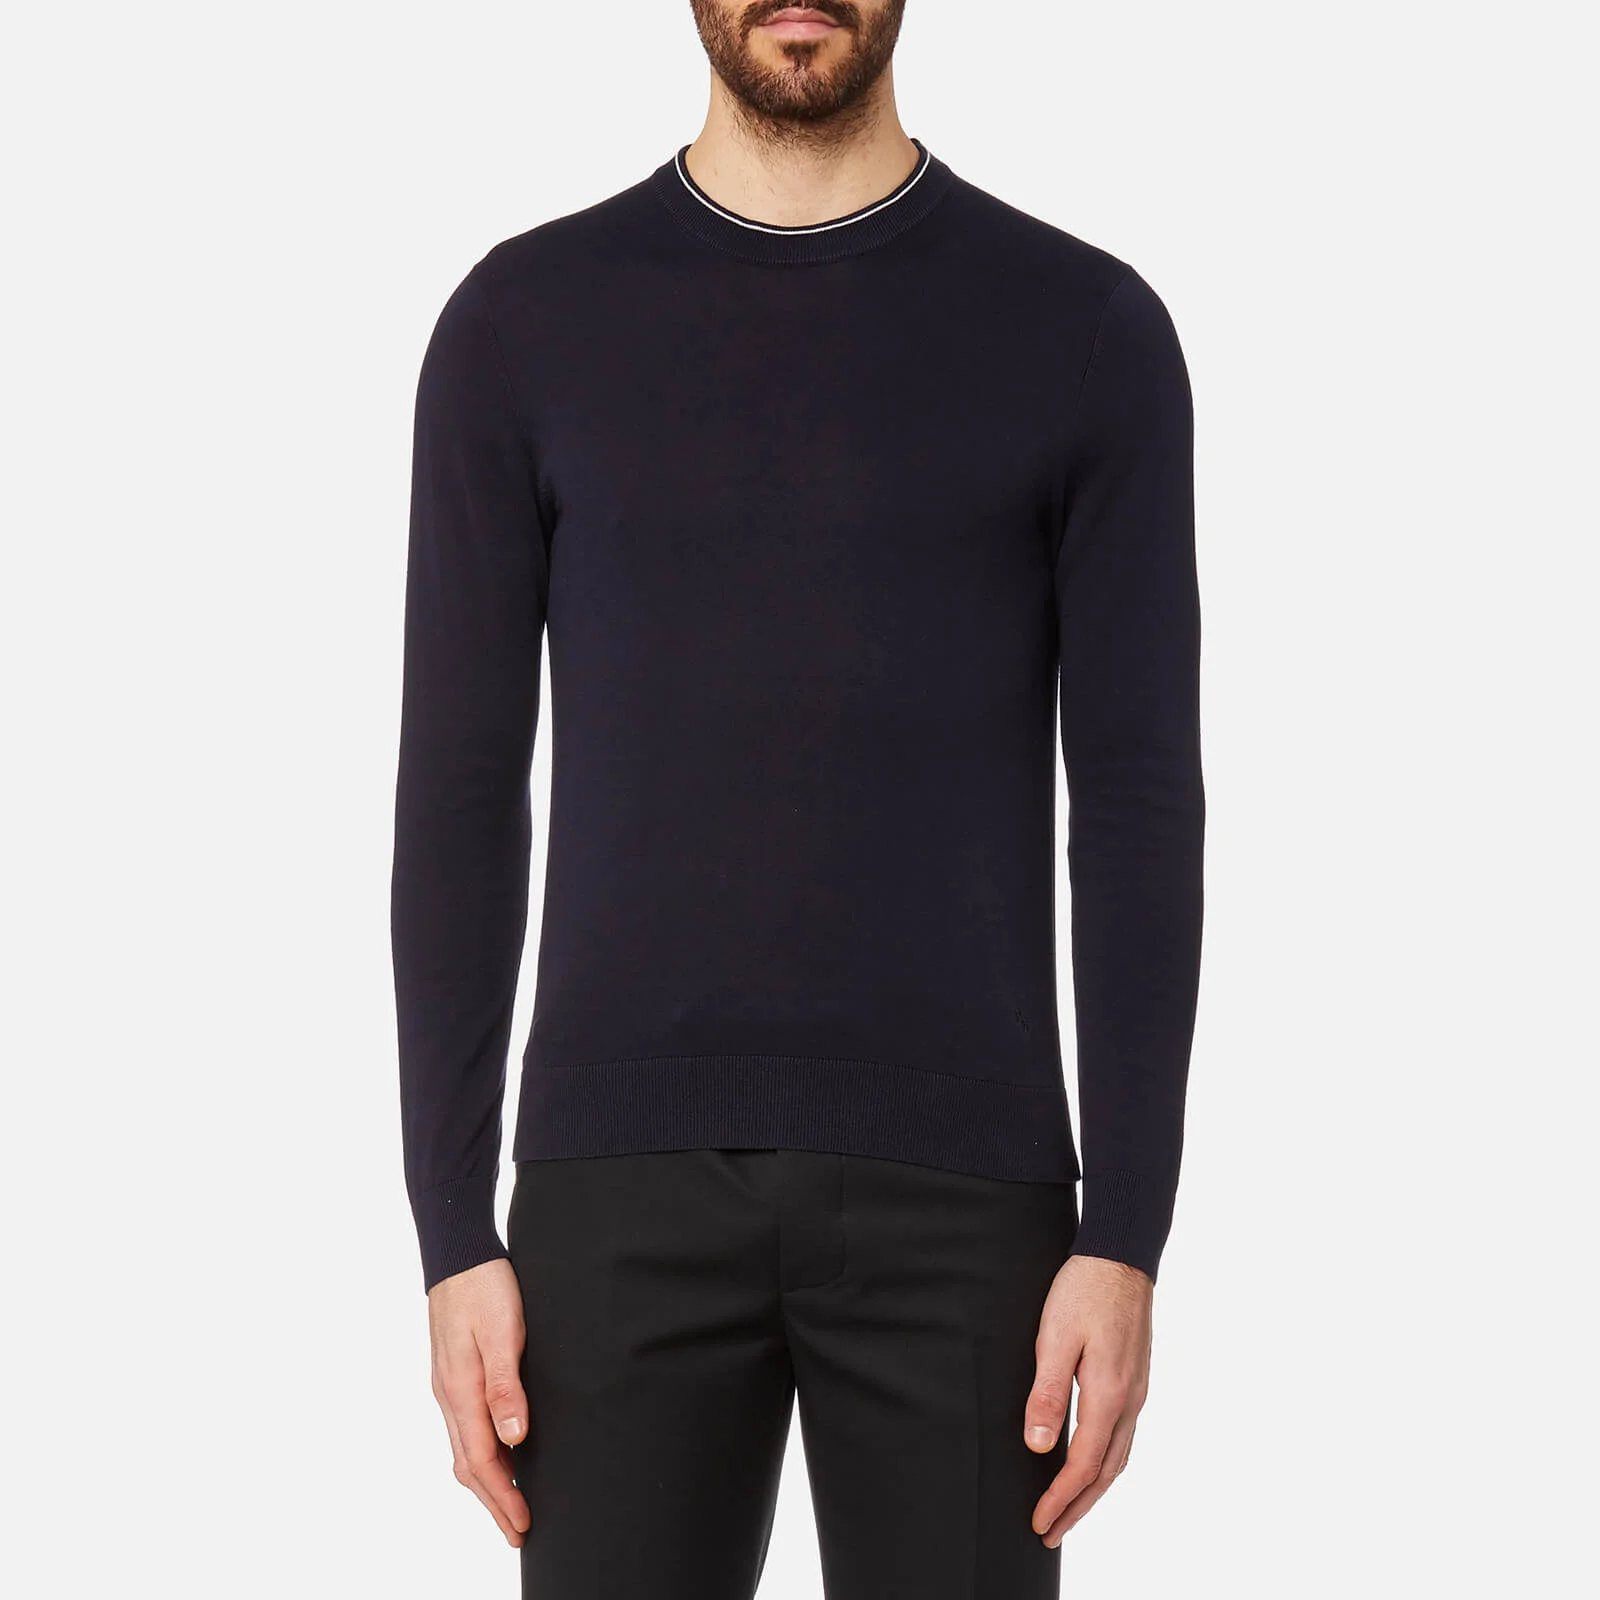 PS Paul Smith Men's Crew Neck Knitted Jumper - Navy Image 1